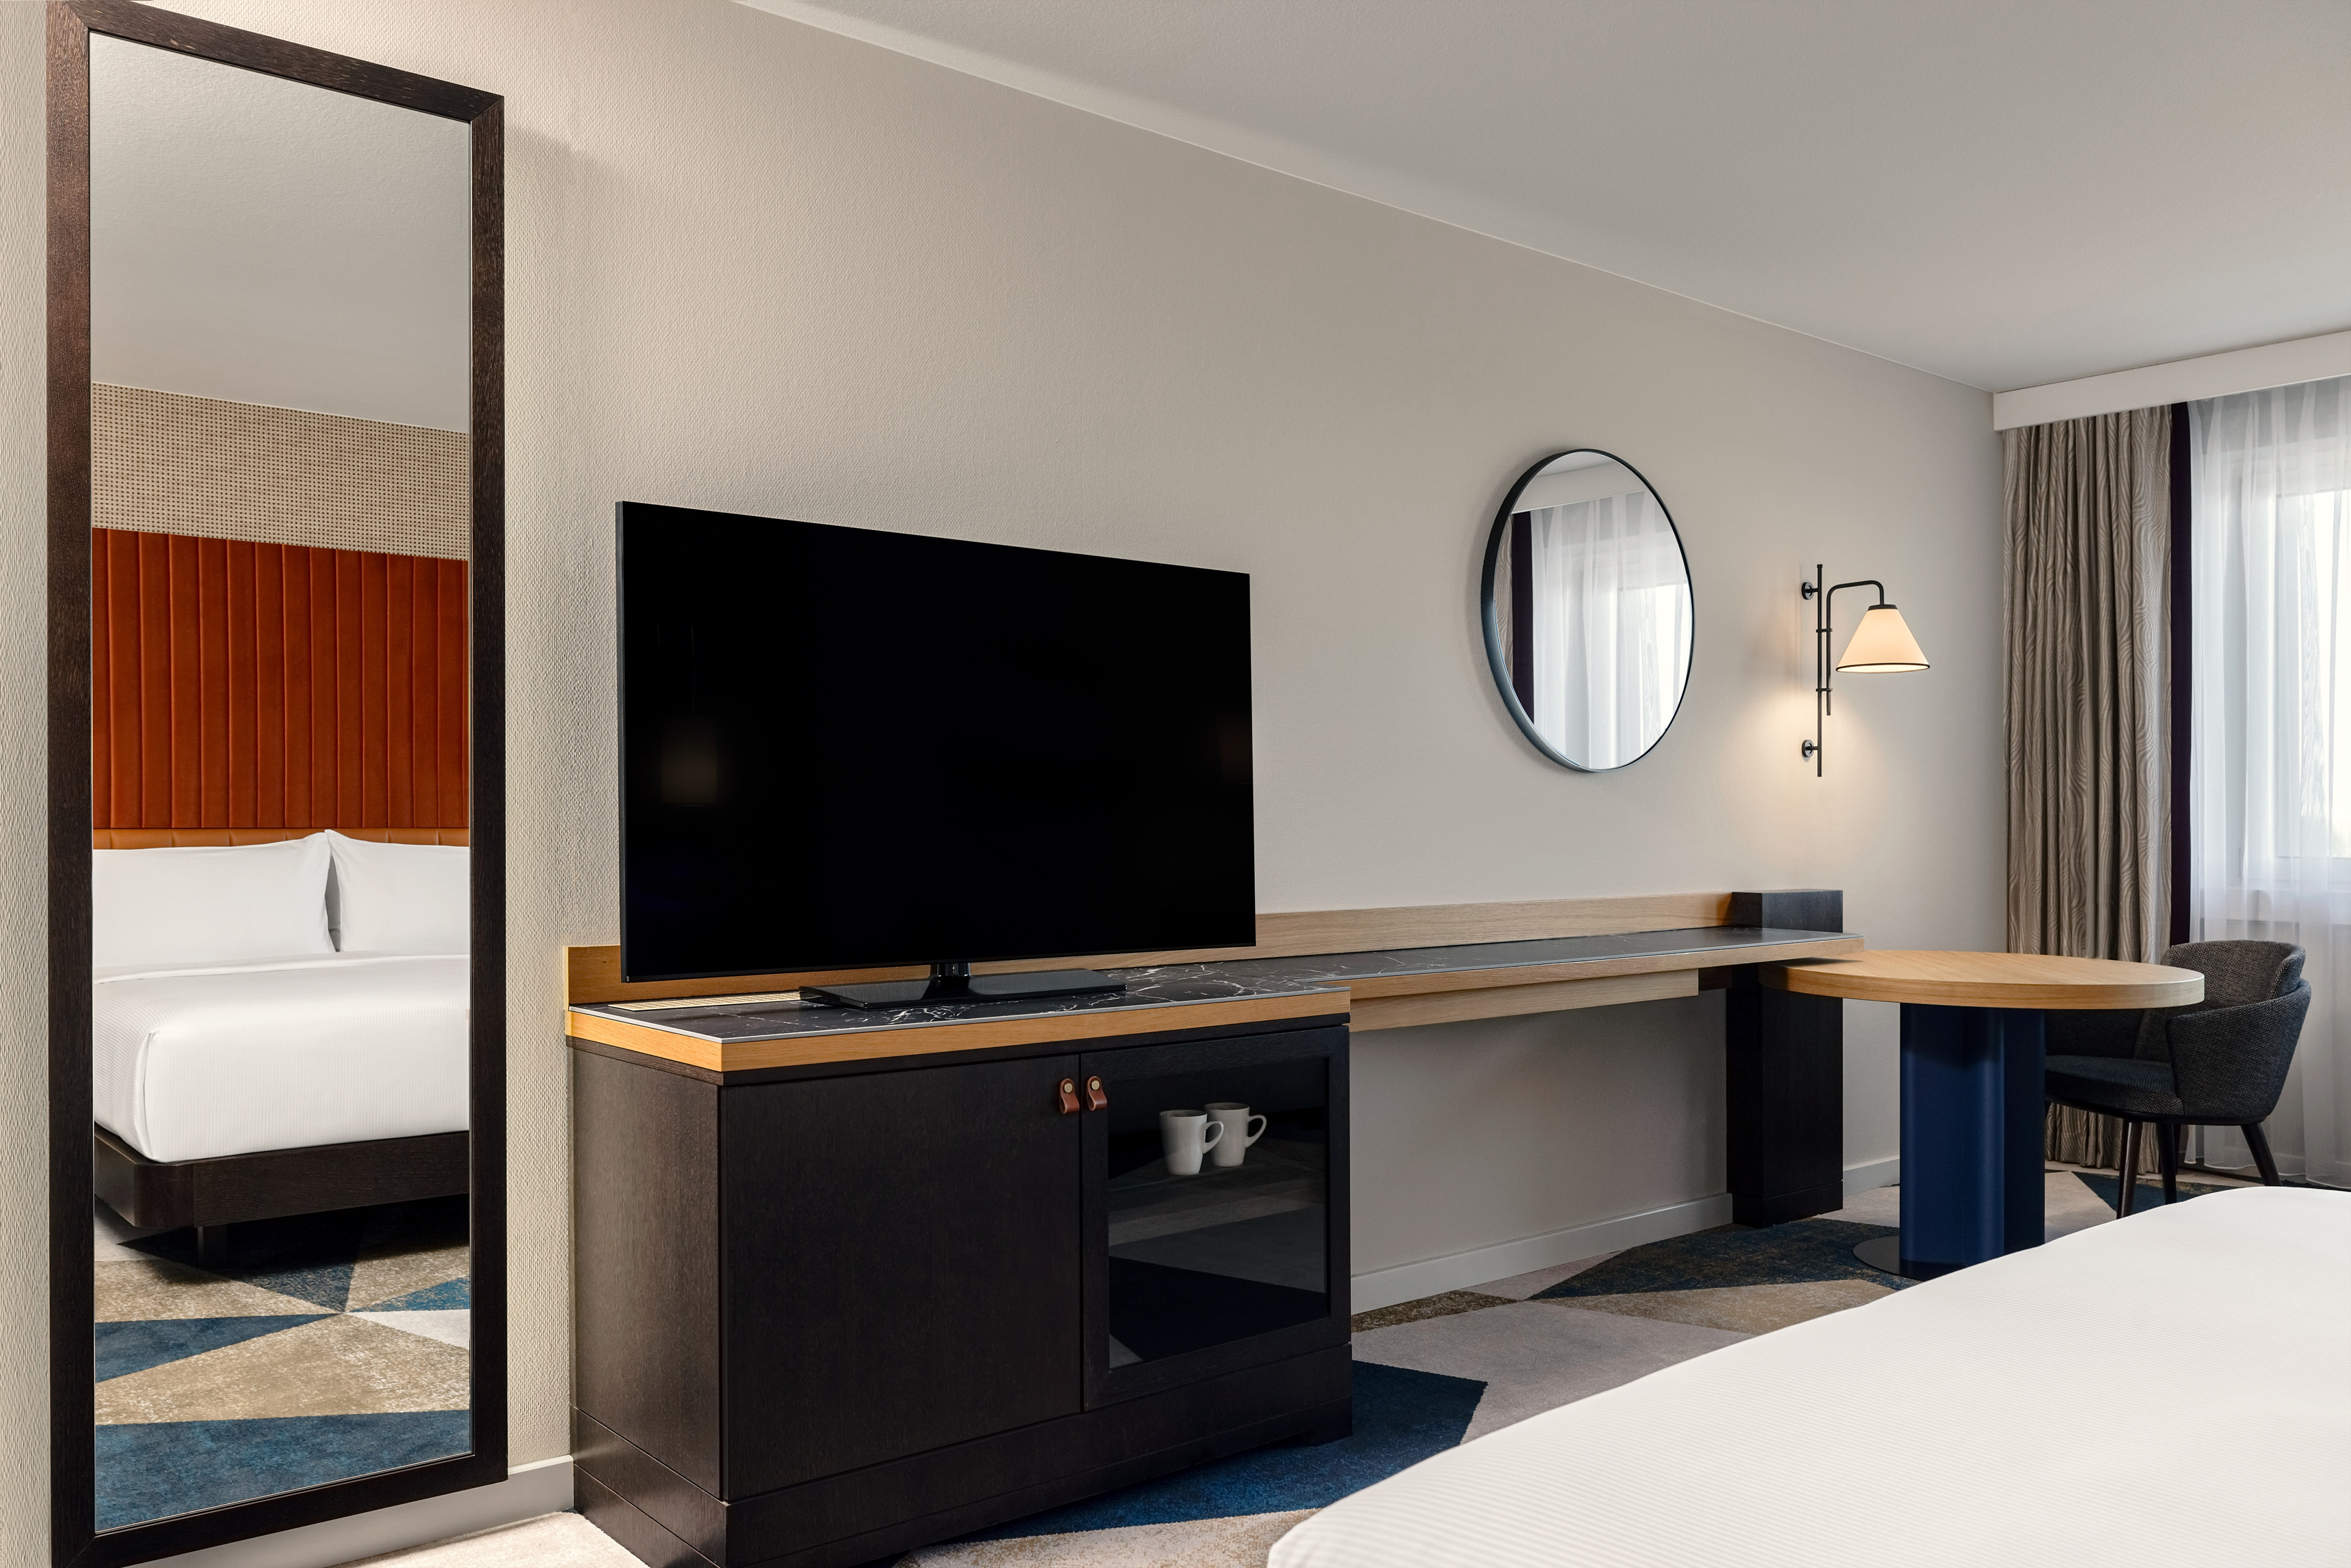 HDTV, Mirror and Desk Area in a Guest Room